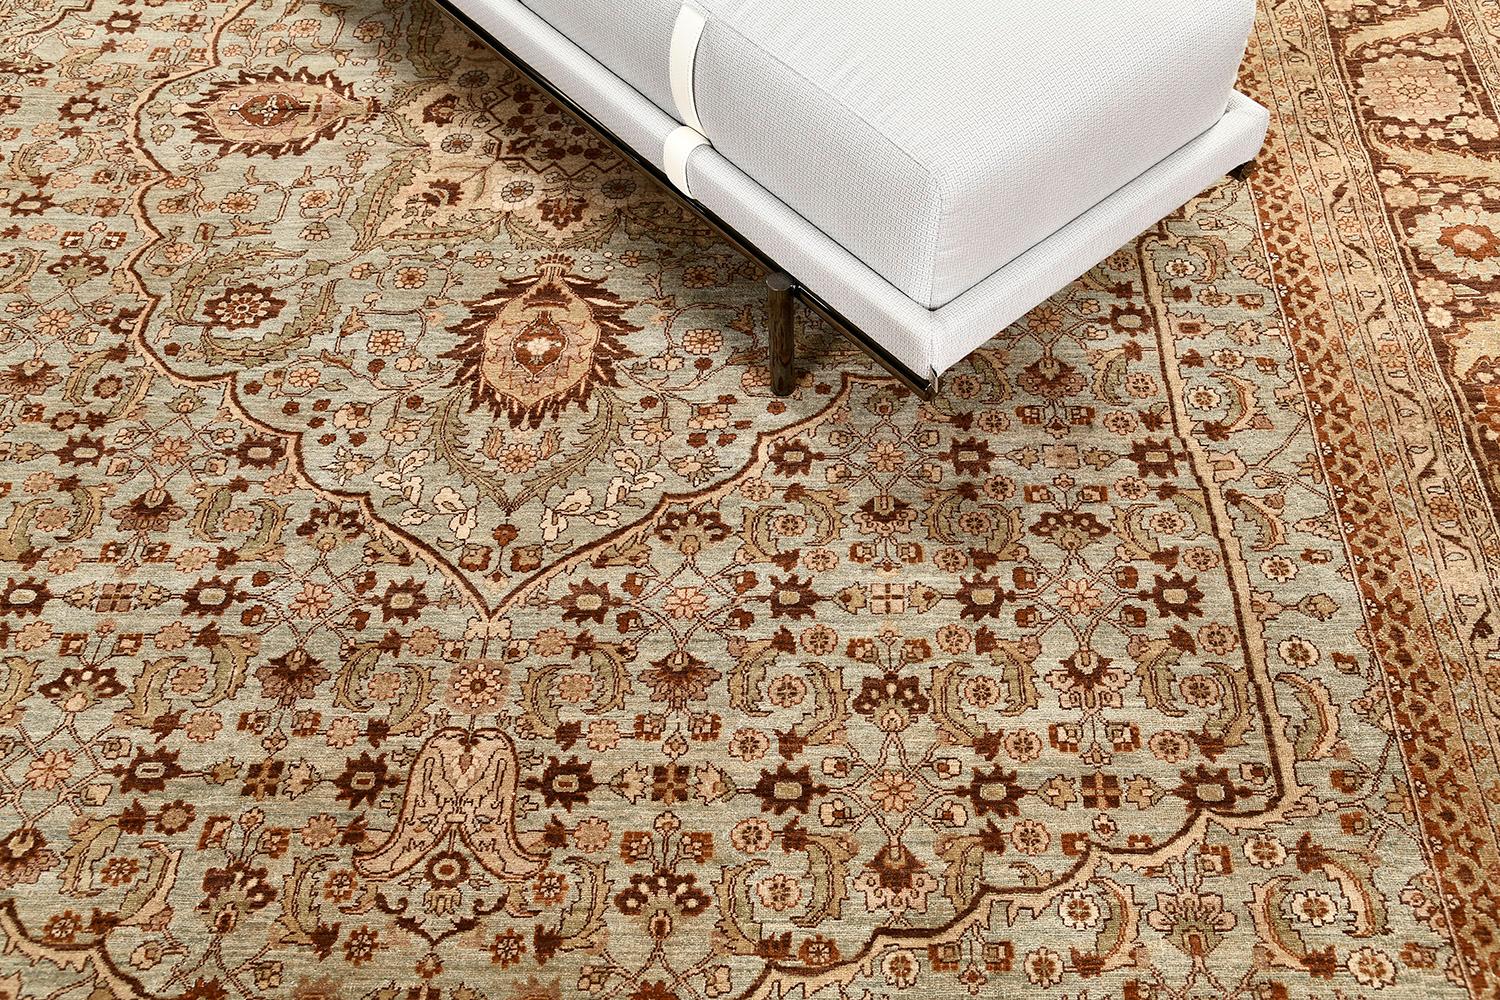 A spectacular Tabriz Hadji Halili style rug that emanates its natural brilliance. The arabesque central medallion forms as a preparation to eventually highlight elements as it cascades throughout this sophisticated rug. Warm and earthy tones of